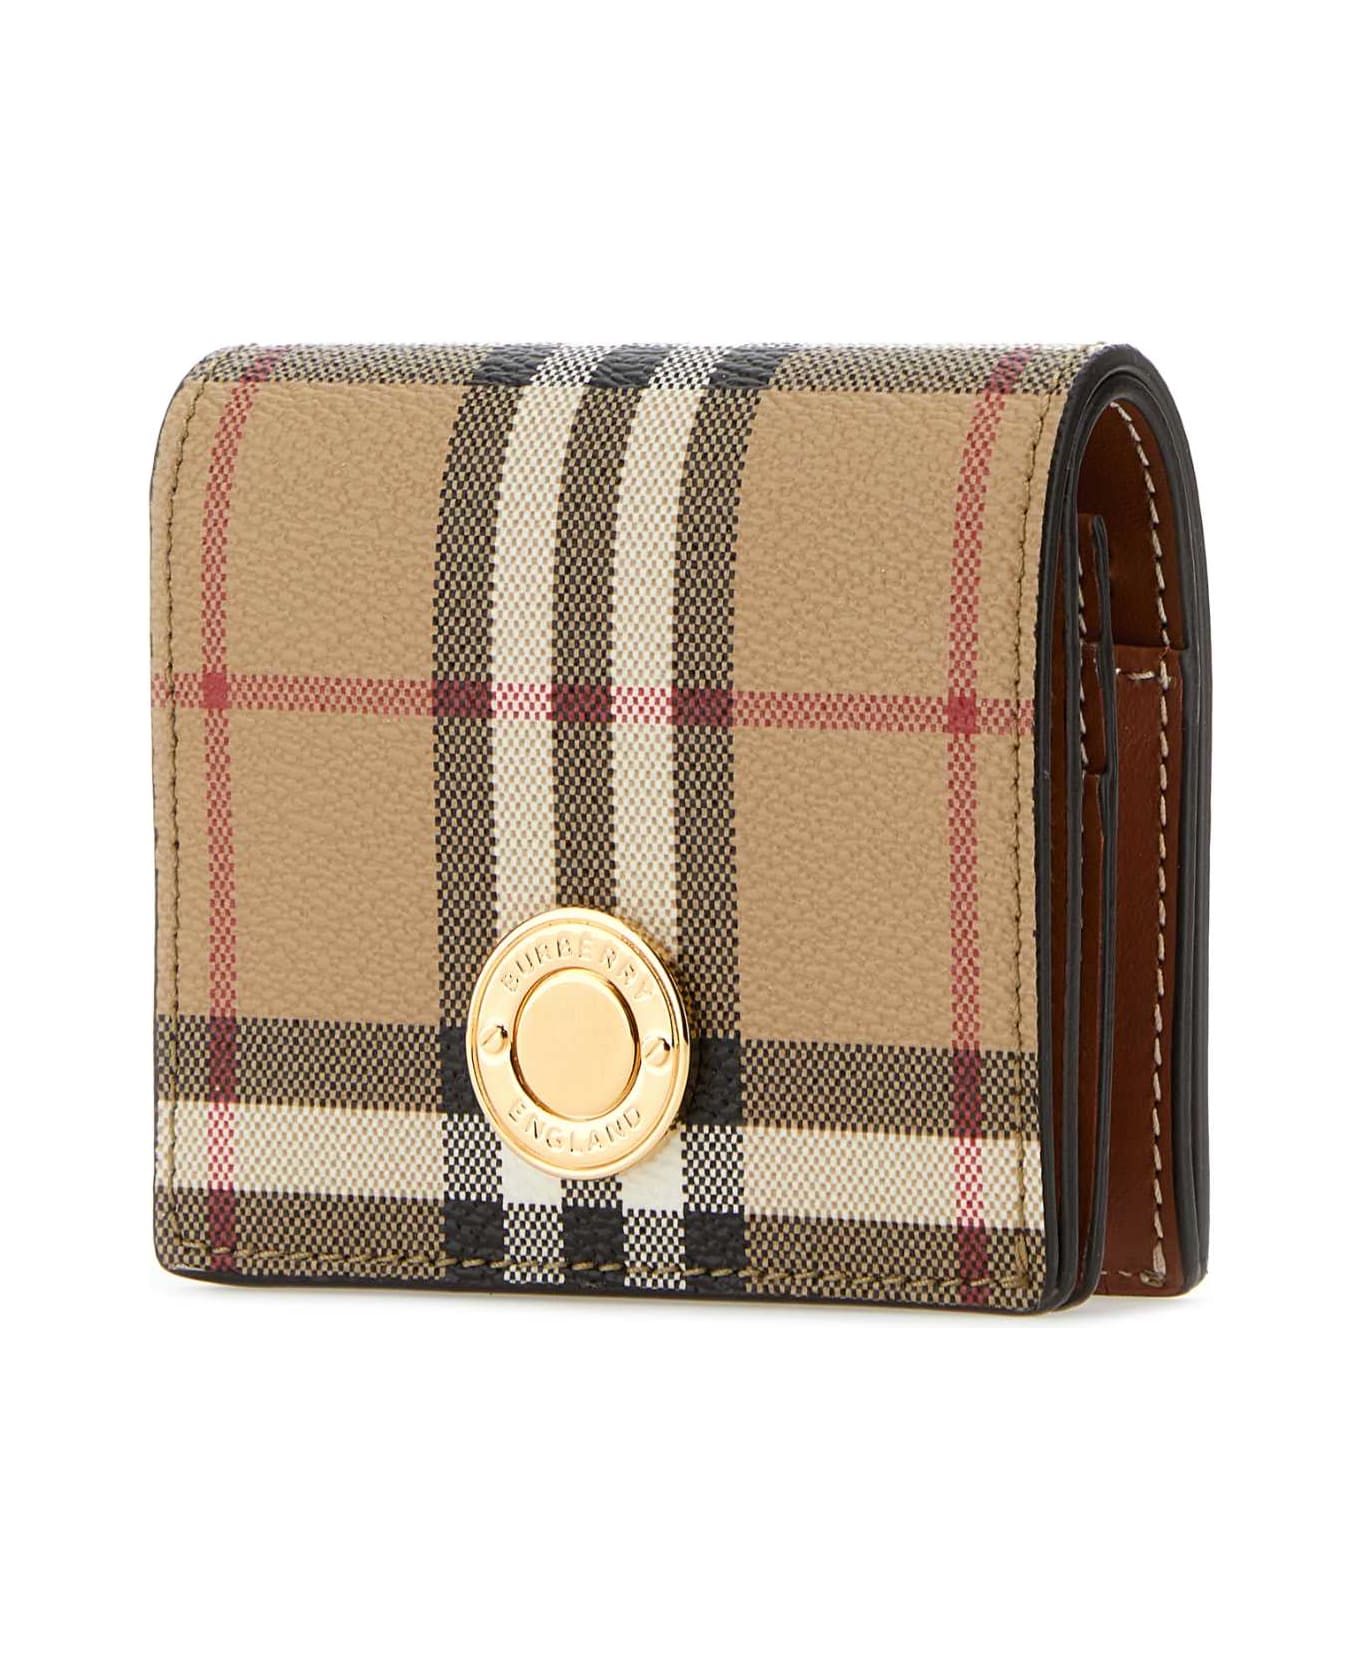 Burberry Printed Canvas Small Wallet - ARCHIVEBEIGE